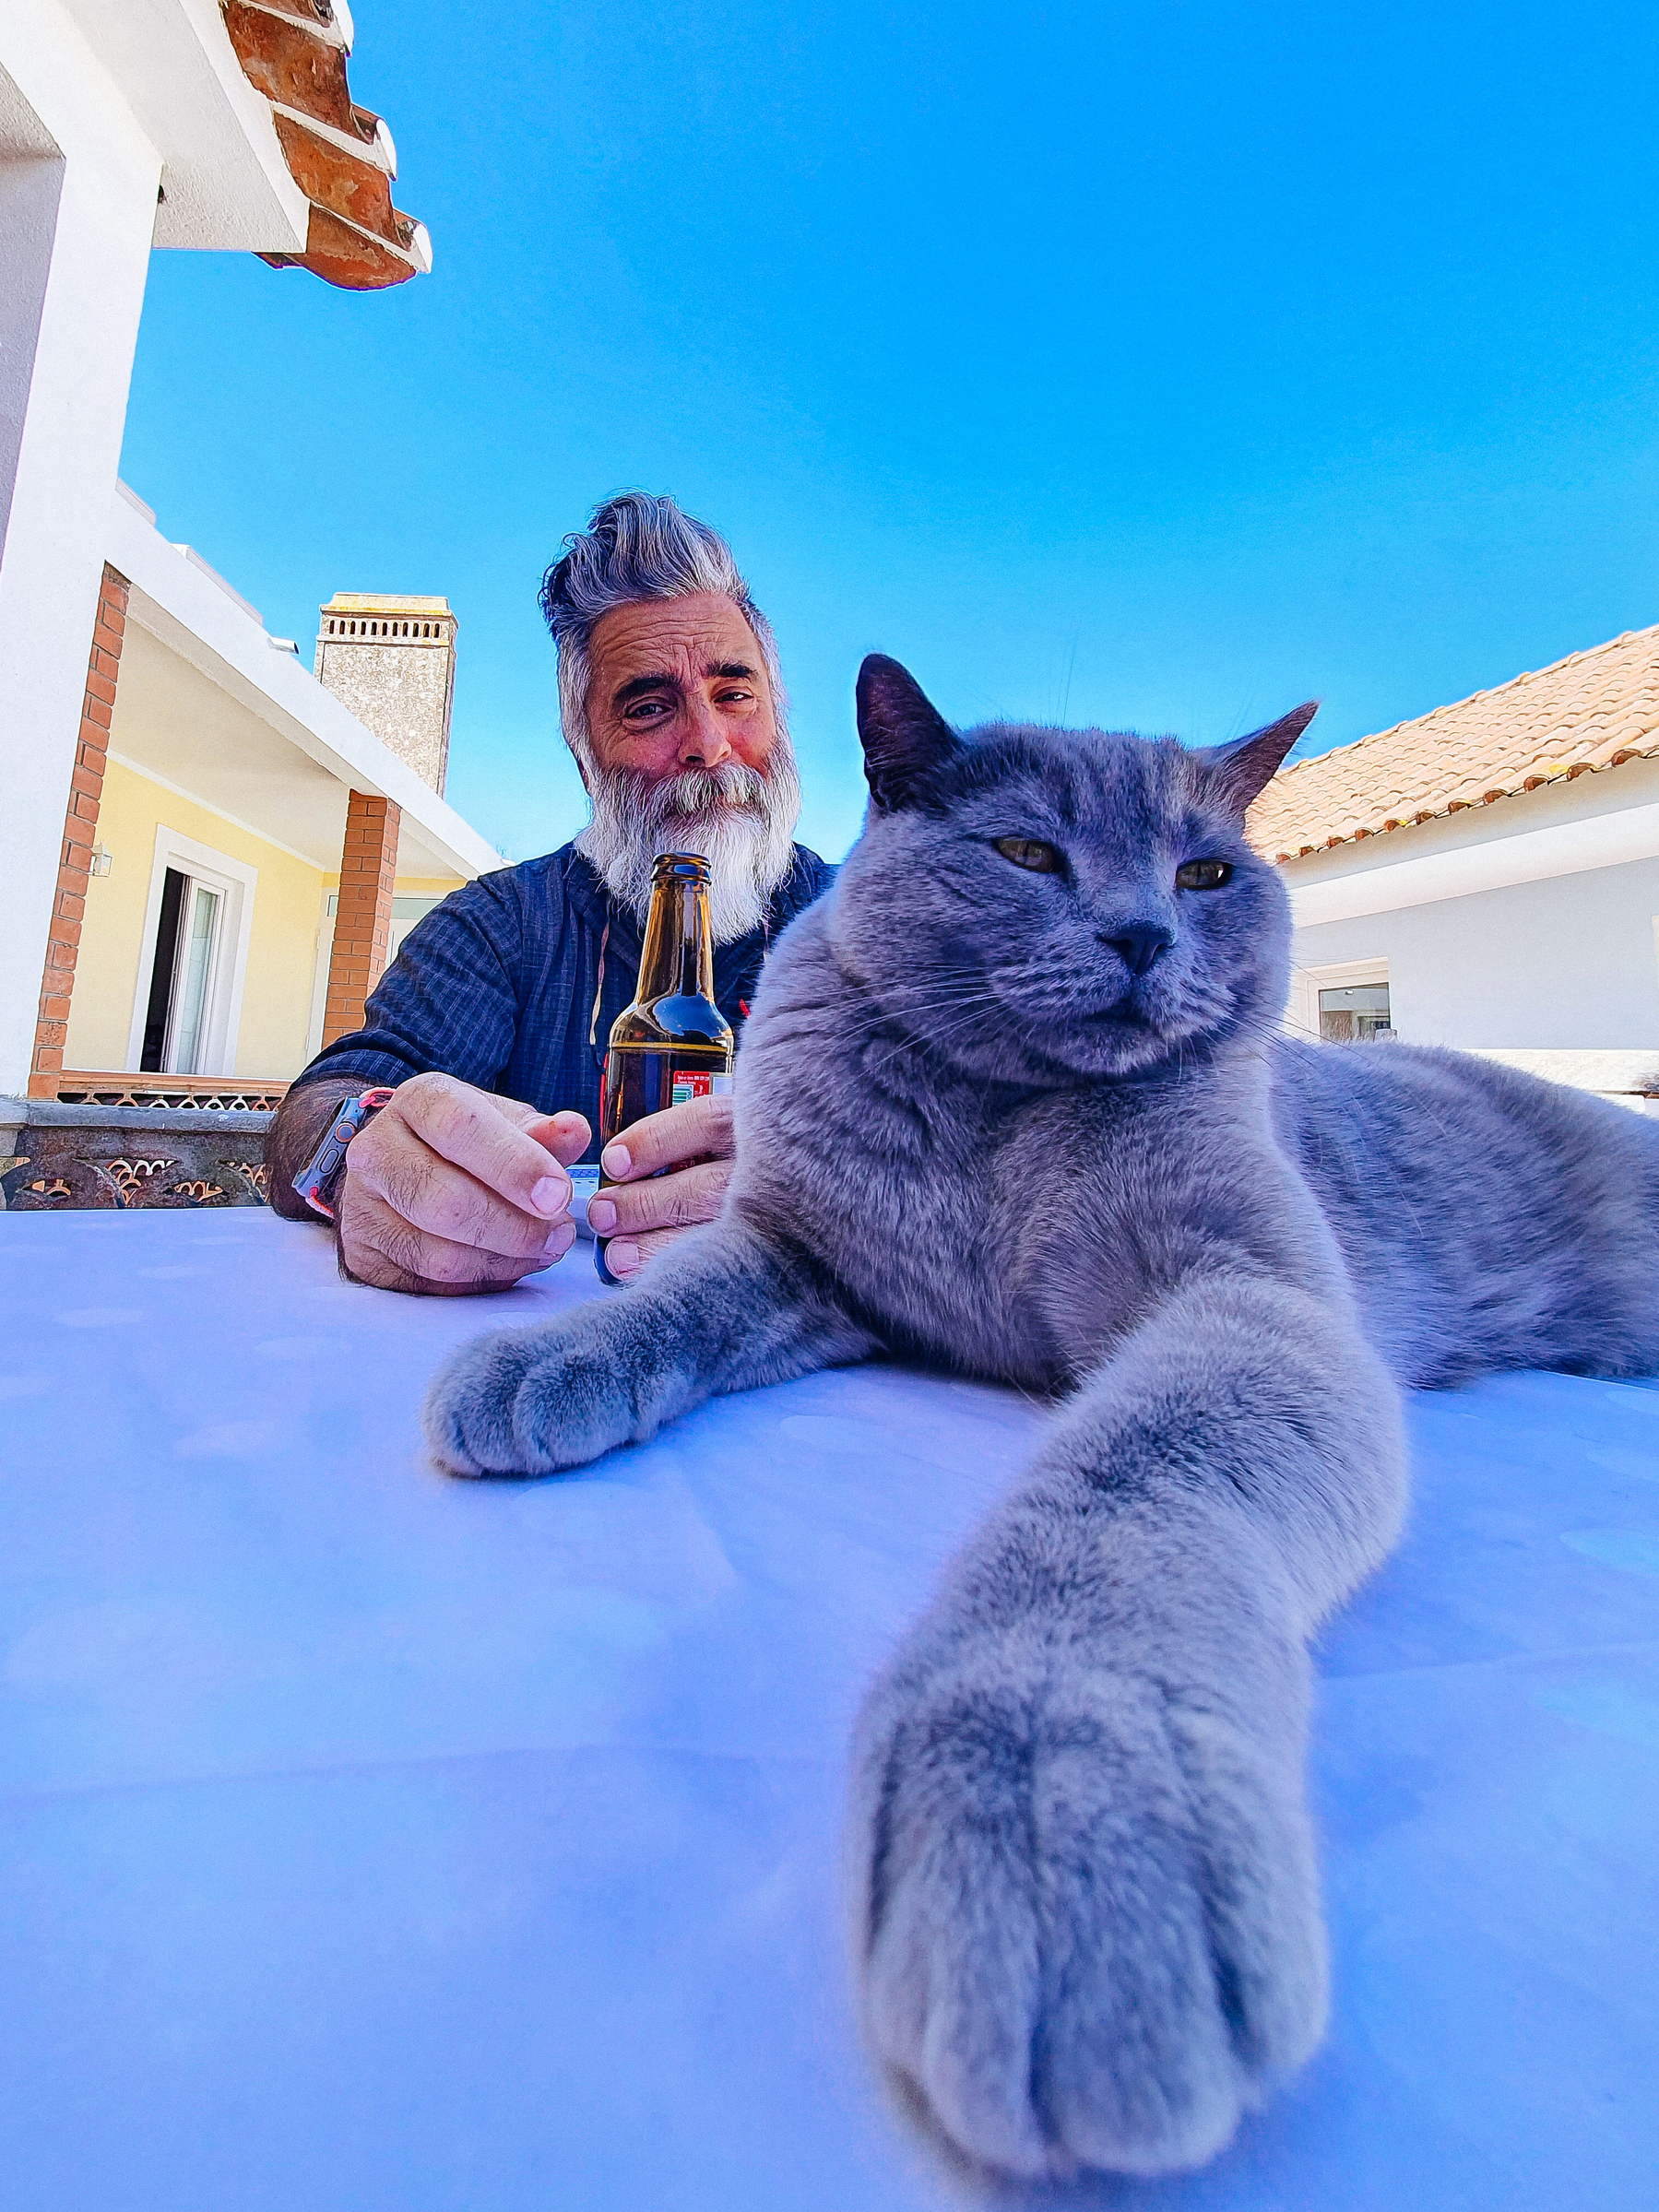 A cat in the foreground, with a bearded man holding a beer in the background. 